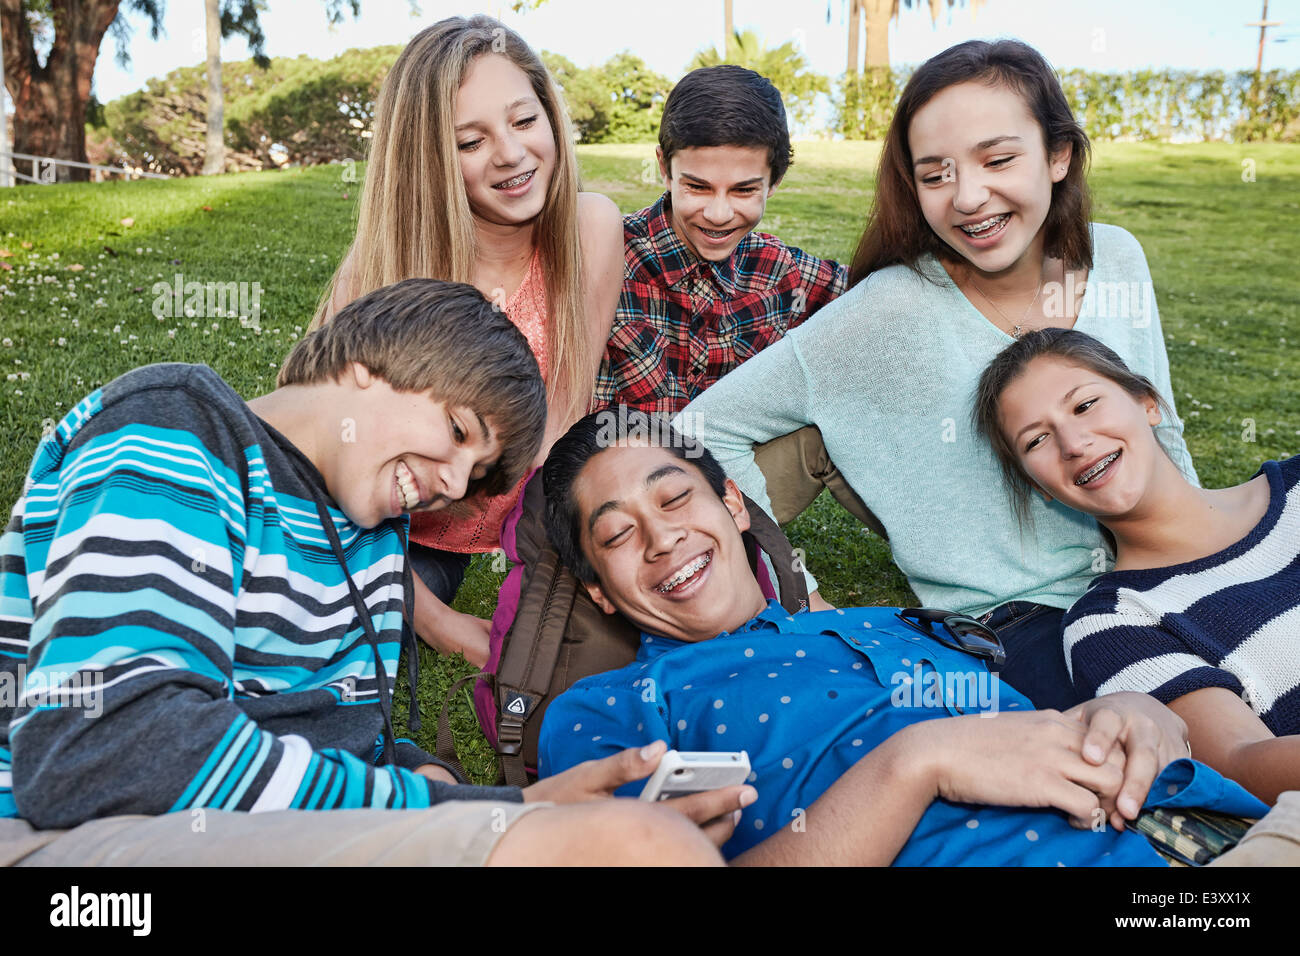 Teenagers relaxing together in grass Stock Photo